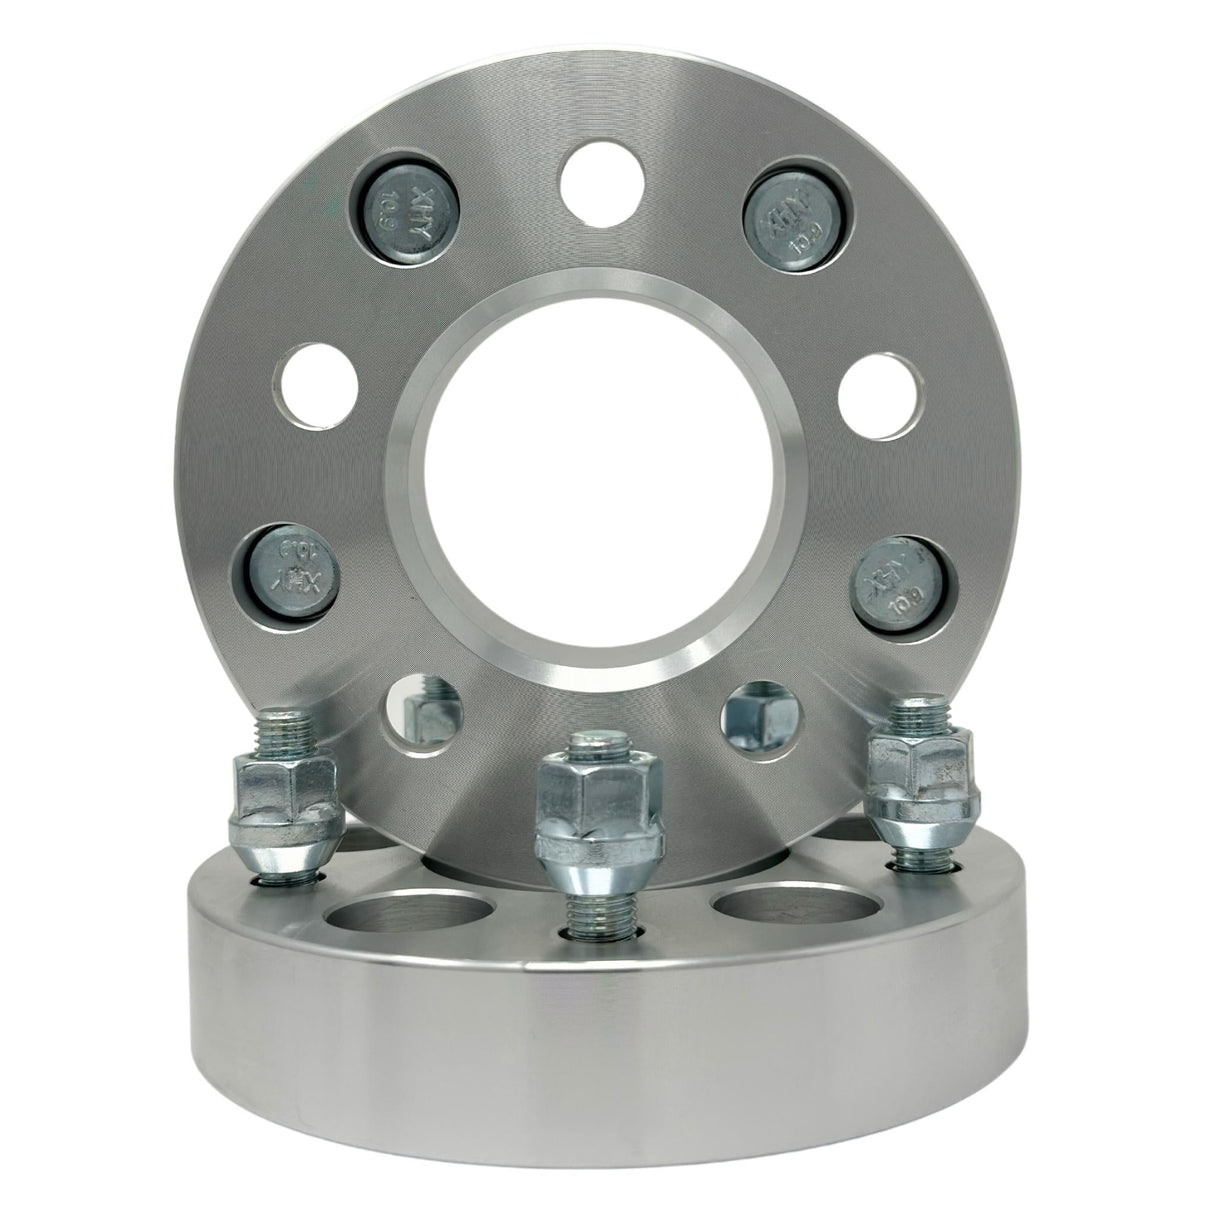 5x5 to 5x4.75 Wheel Adapters 2" Inch (50mm) 1/2”-20 Studs & Lug Nuts 74mm Center Bore | 5x127 to 5x120.7